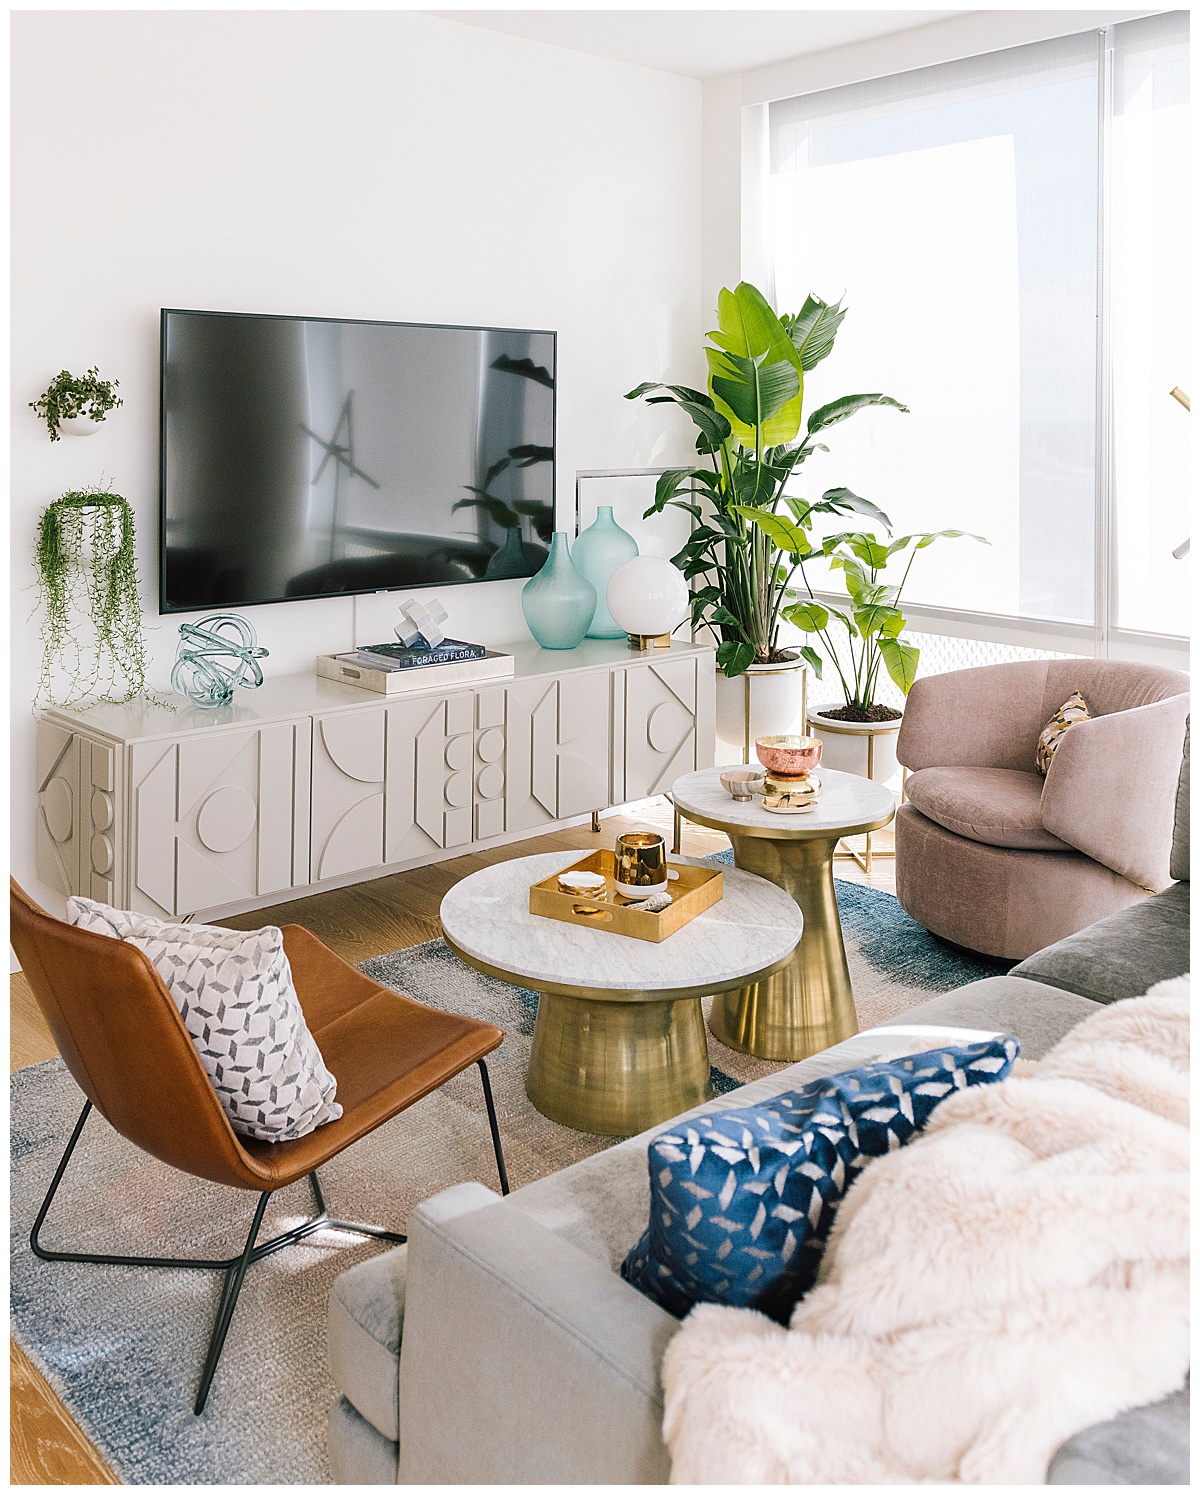 West Elm Room Reveal! – Our Brooklyn Industrial Apartment - with love caila